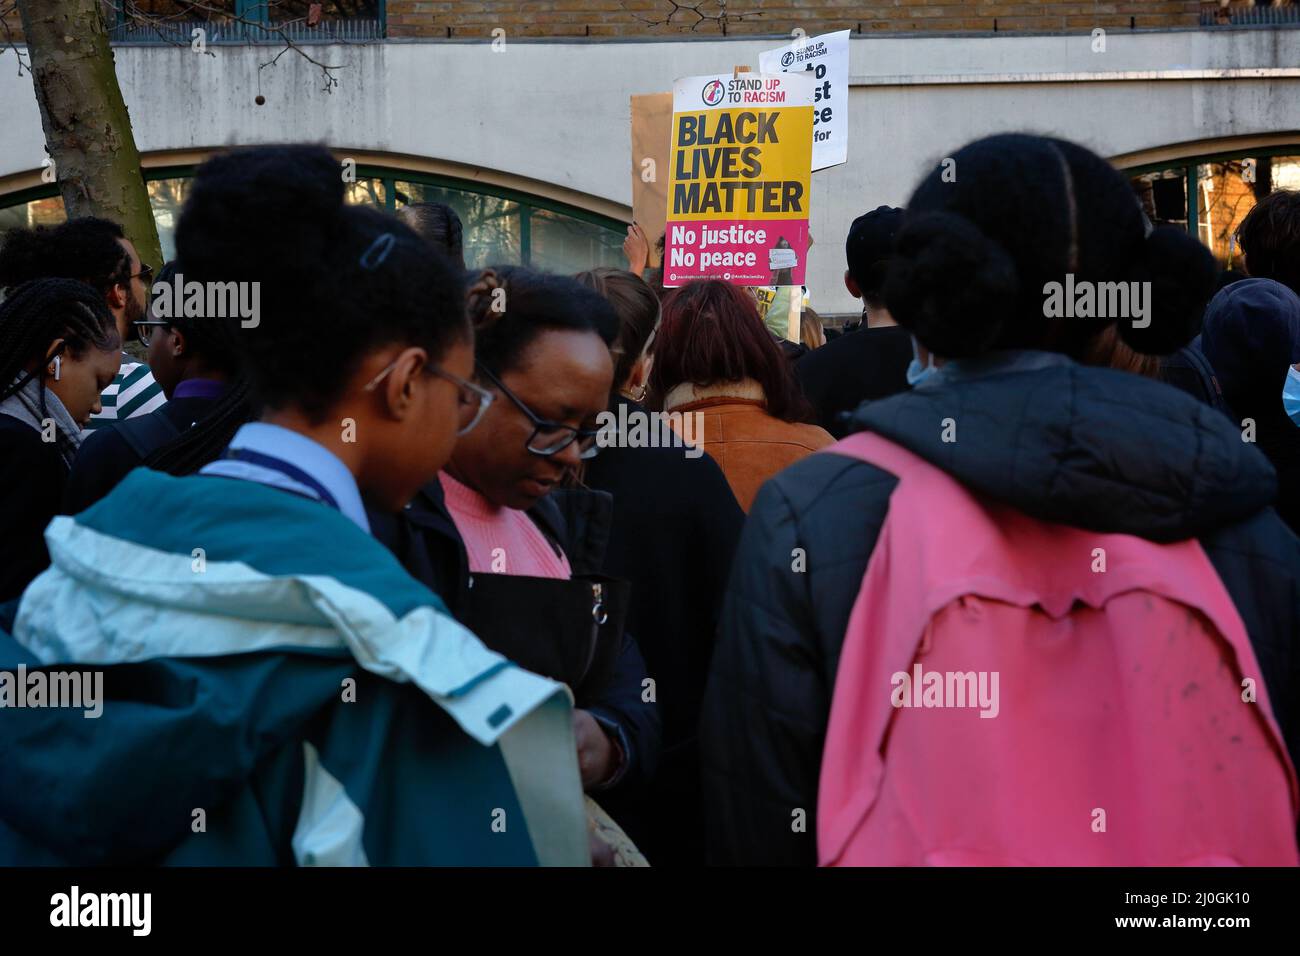 London (UK), 18.03.2022: Protesters gather outside Stoke Newington Police Station in Hackney to demonstrate against the strip- search by police of a s Stock Photo